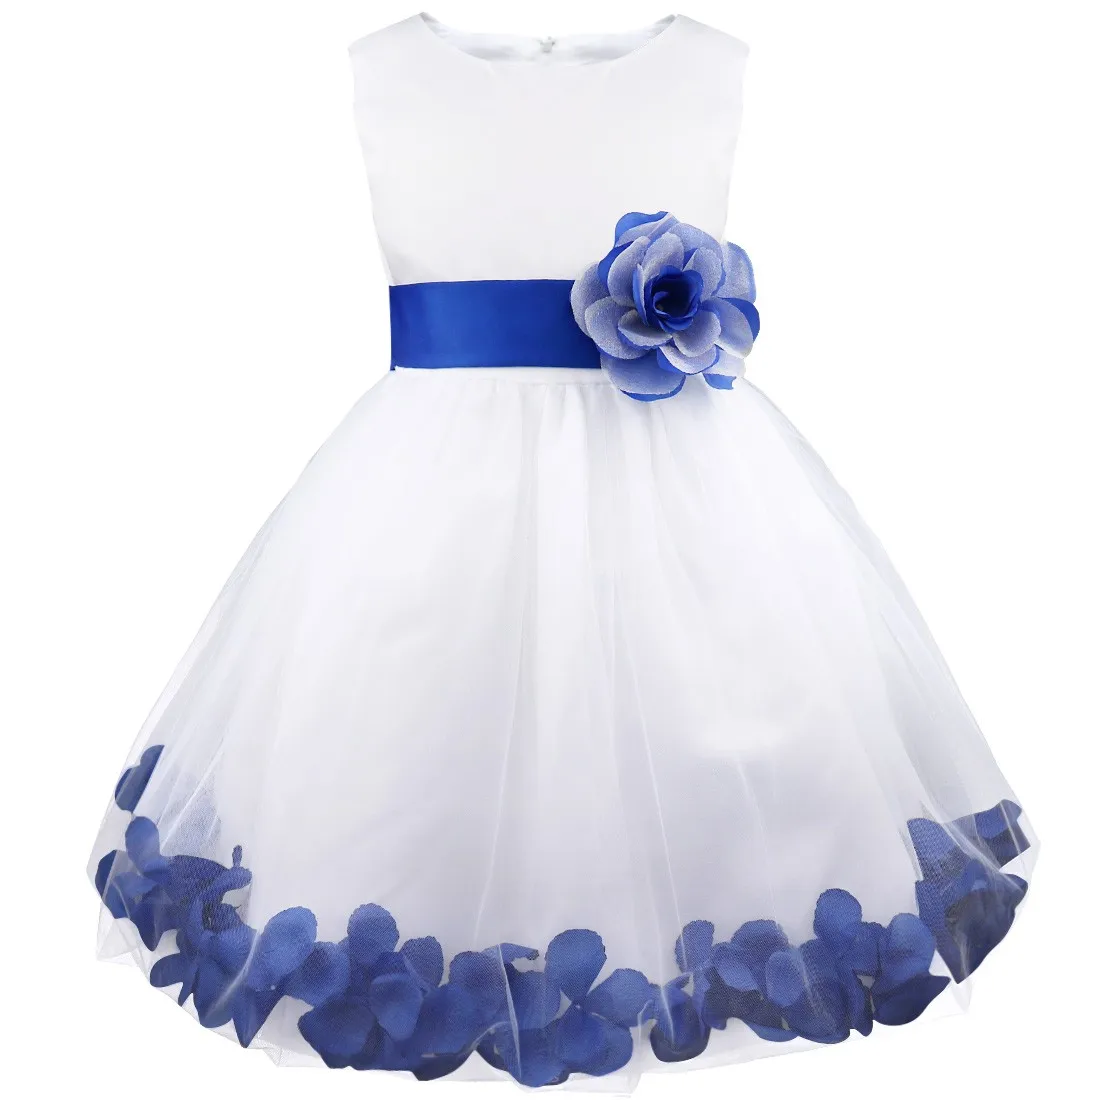 

Kids Girls Party Princess Dress Flower Petals Tulle Birthday Wedding Bridal Dresses Toddler Formal Pageant Bridesmaid Prom Gown